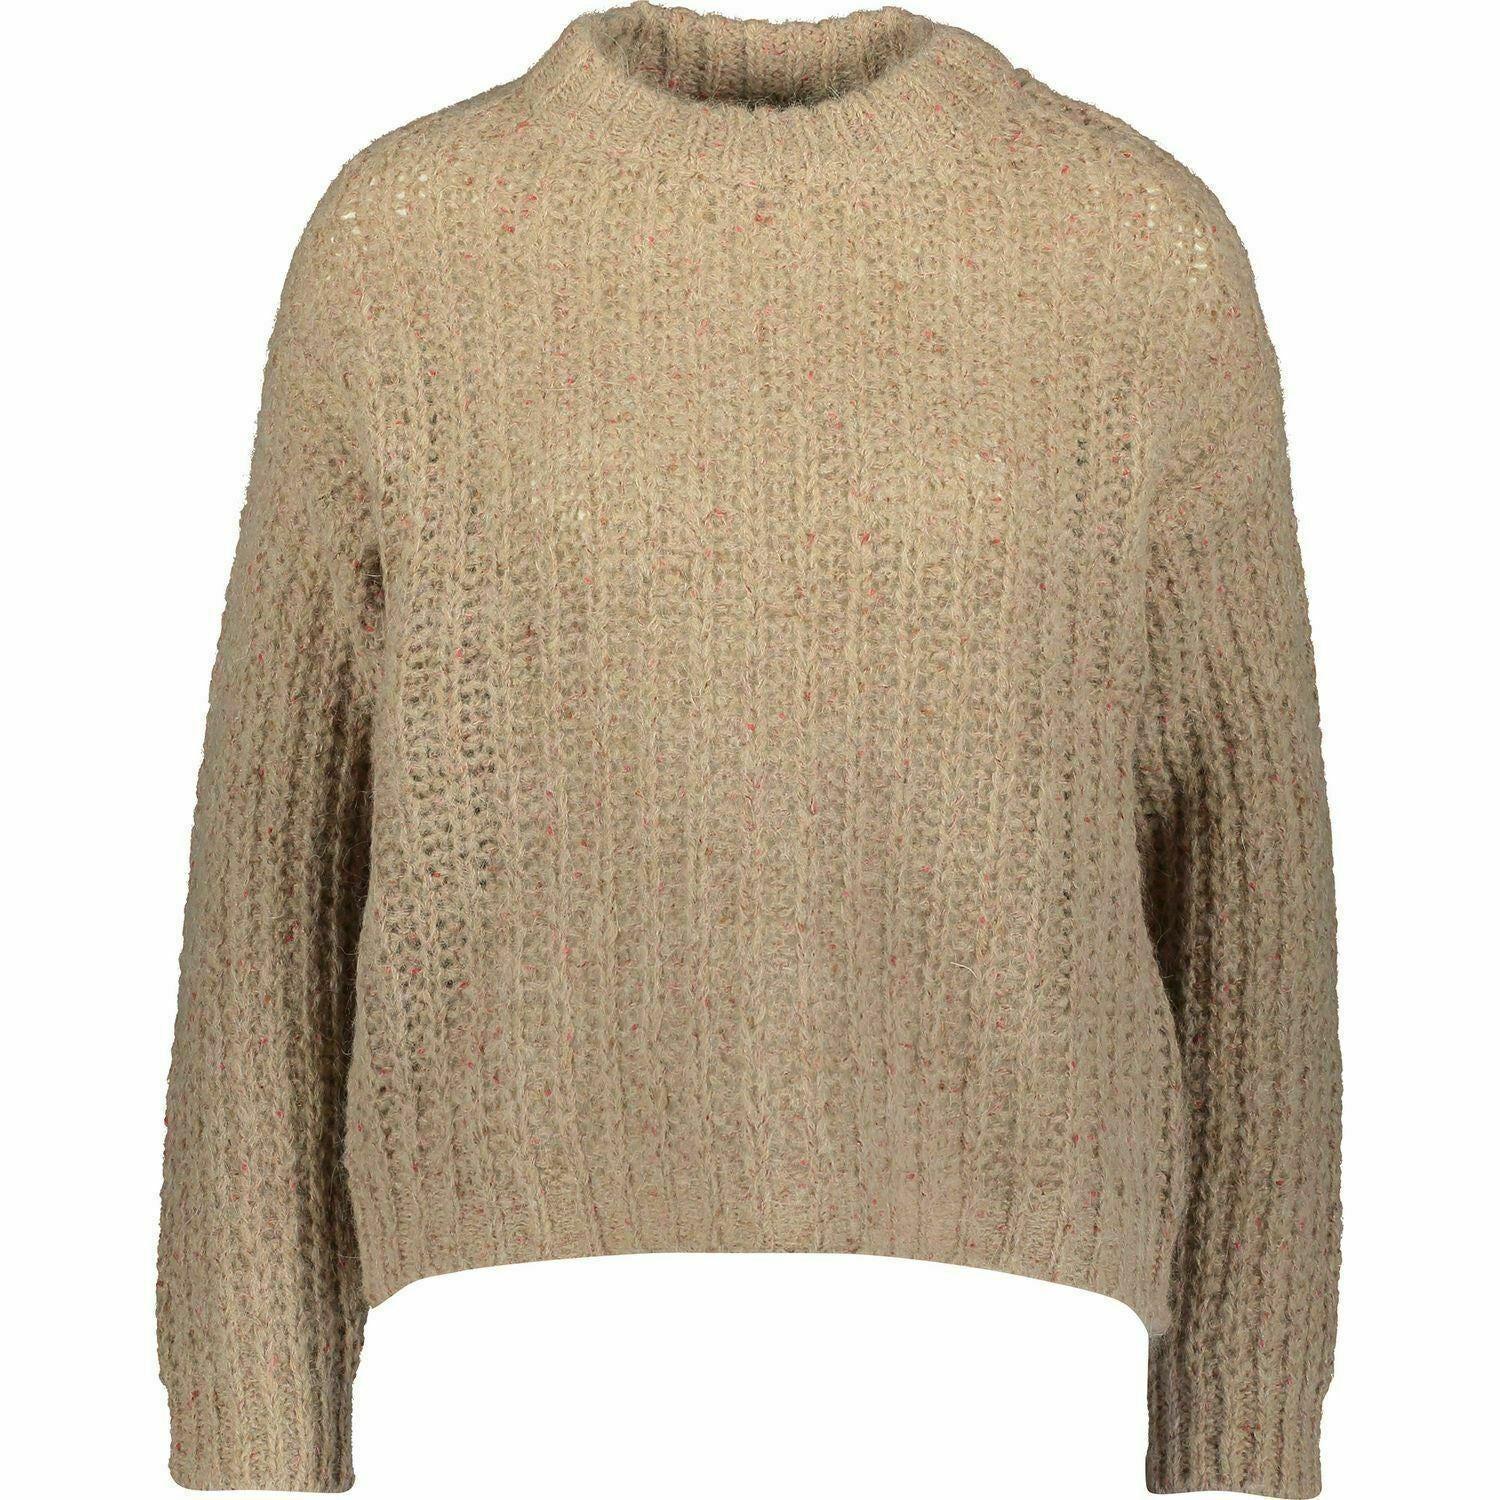 BARTOLINI Women's Knitted Cropped Jumper, Brown with Pink Speckles, size L